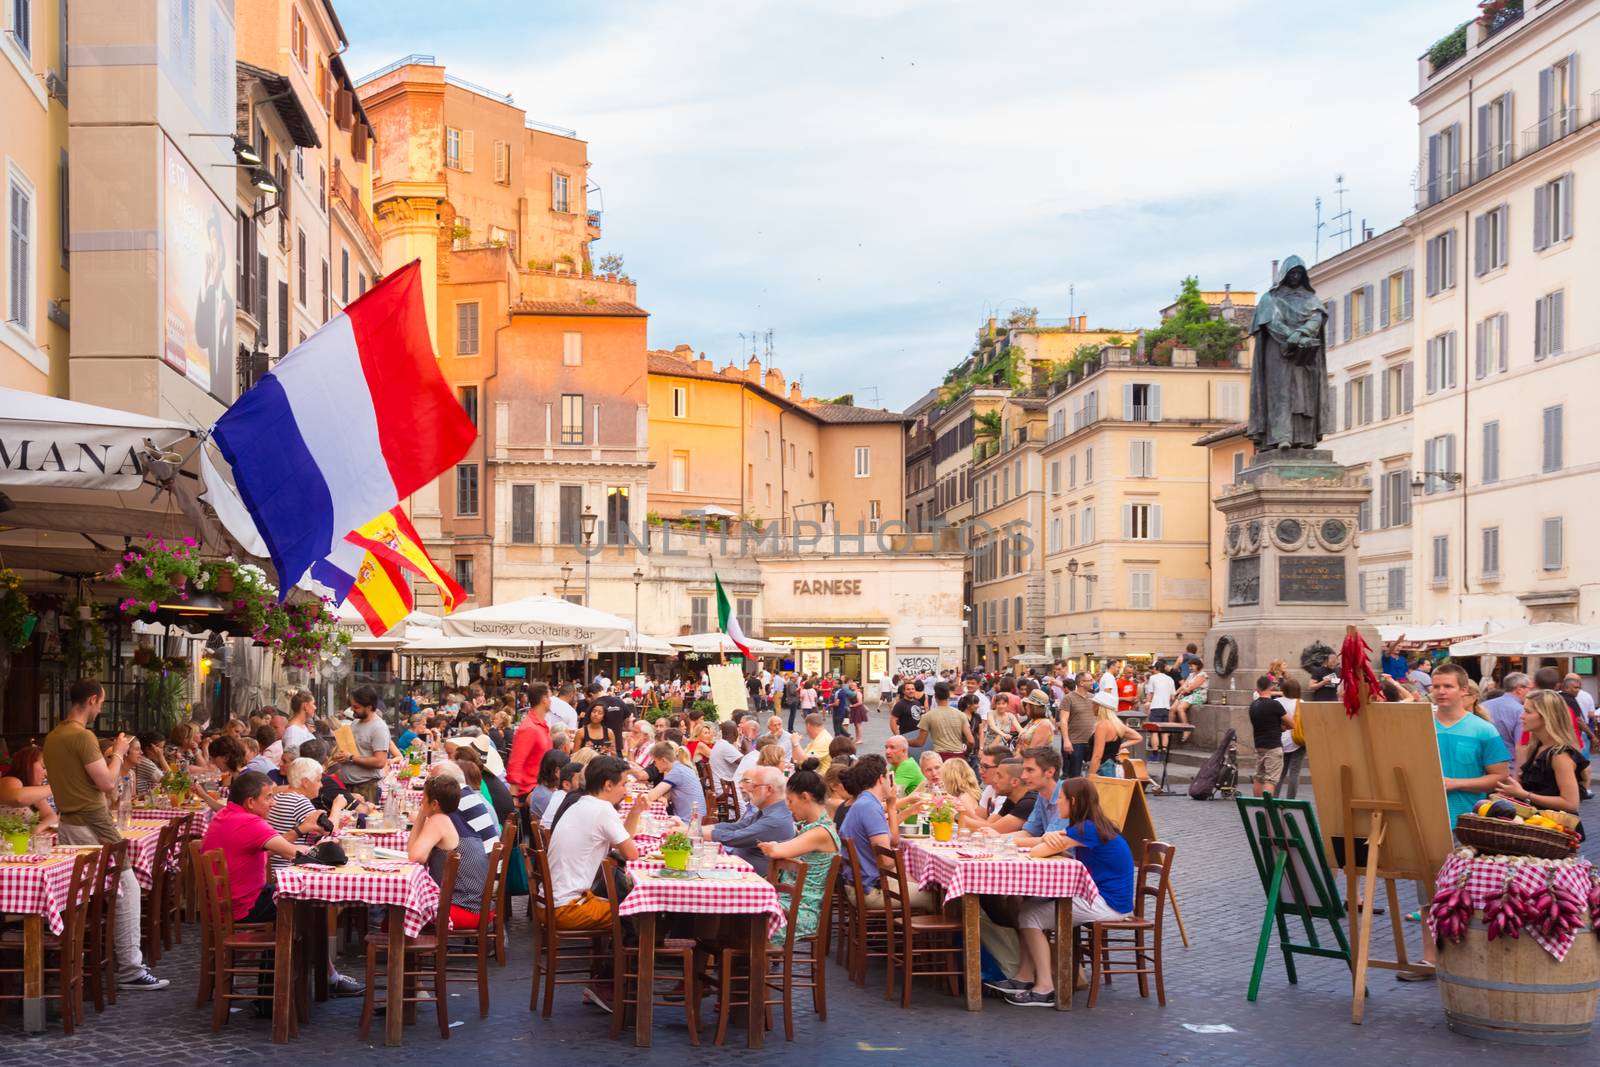 ROME, ITALY - JUNE 13 2014: People having aperitif which in Italy traditionally includes free all you can eat buffet of pizzas and pastas, on JUNE 13 2014 on Piazza Campo Di Fiori in Rome in Italy.